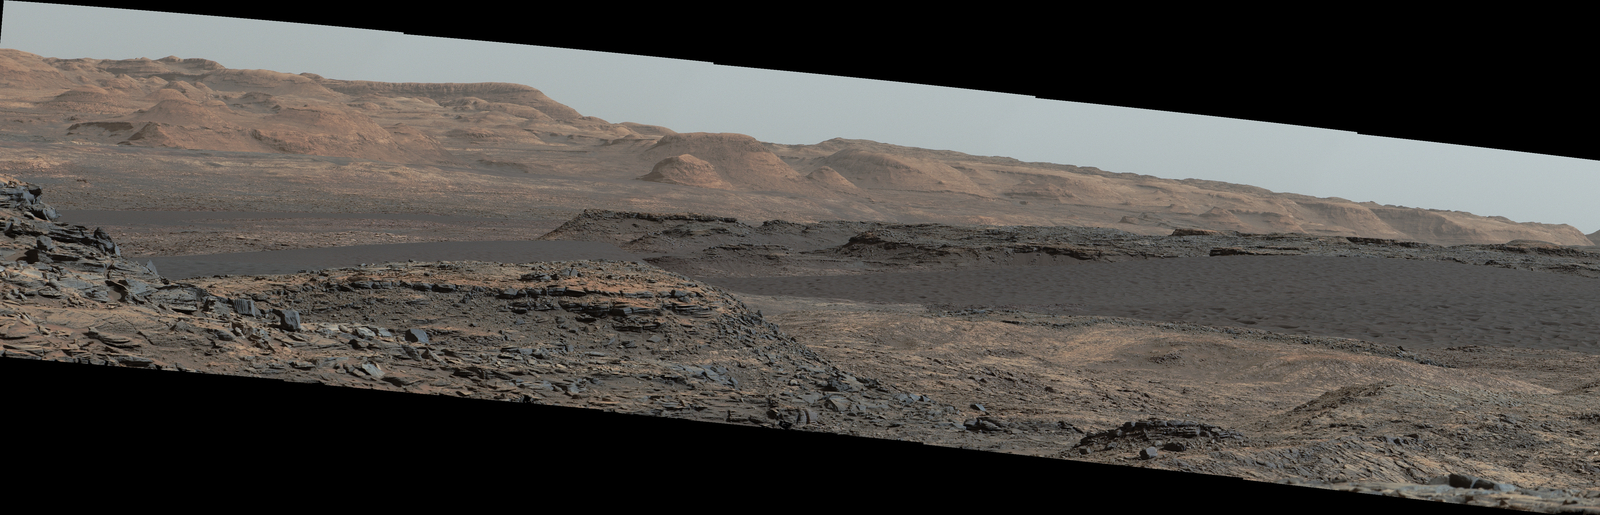 This Sept. 25, 2015, view from the Mast Camera on NASA's Curiosity Mars rover shows a dark sand dune in the middle distance. The rover's examination of dunes on the way toward higher layers of Mount Sharp will be the first in-place study of an active sand dune anywhere other than Earth.